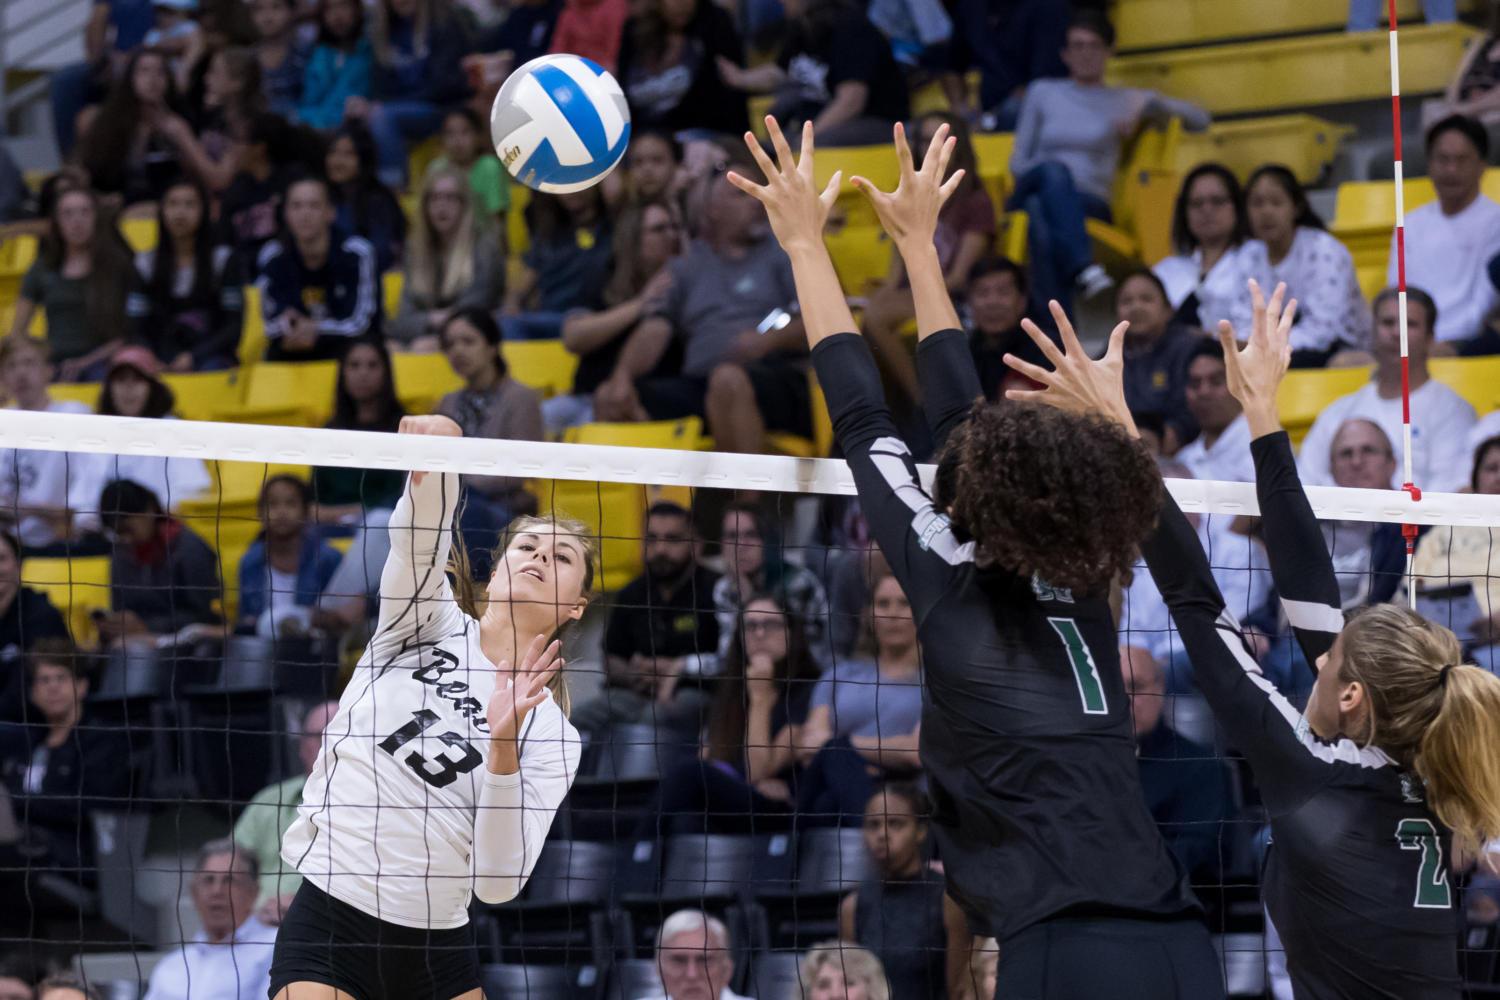 Sophomore libero Hailey Harward settled in nicely at the net with 12 kills while still offering up 18 defensive digs in a loss Friday night against Hawai’i at the Walter Pyramid.